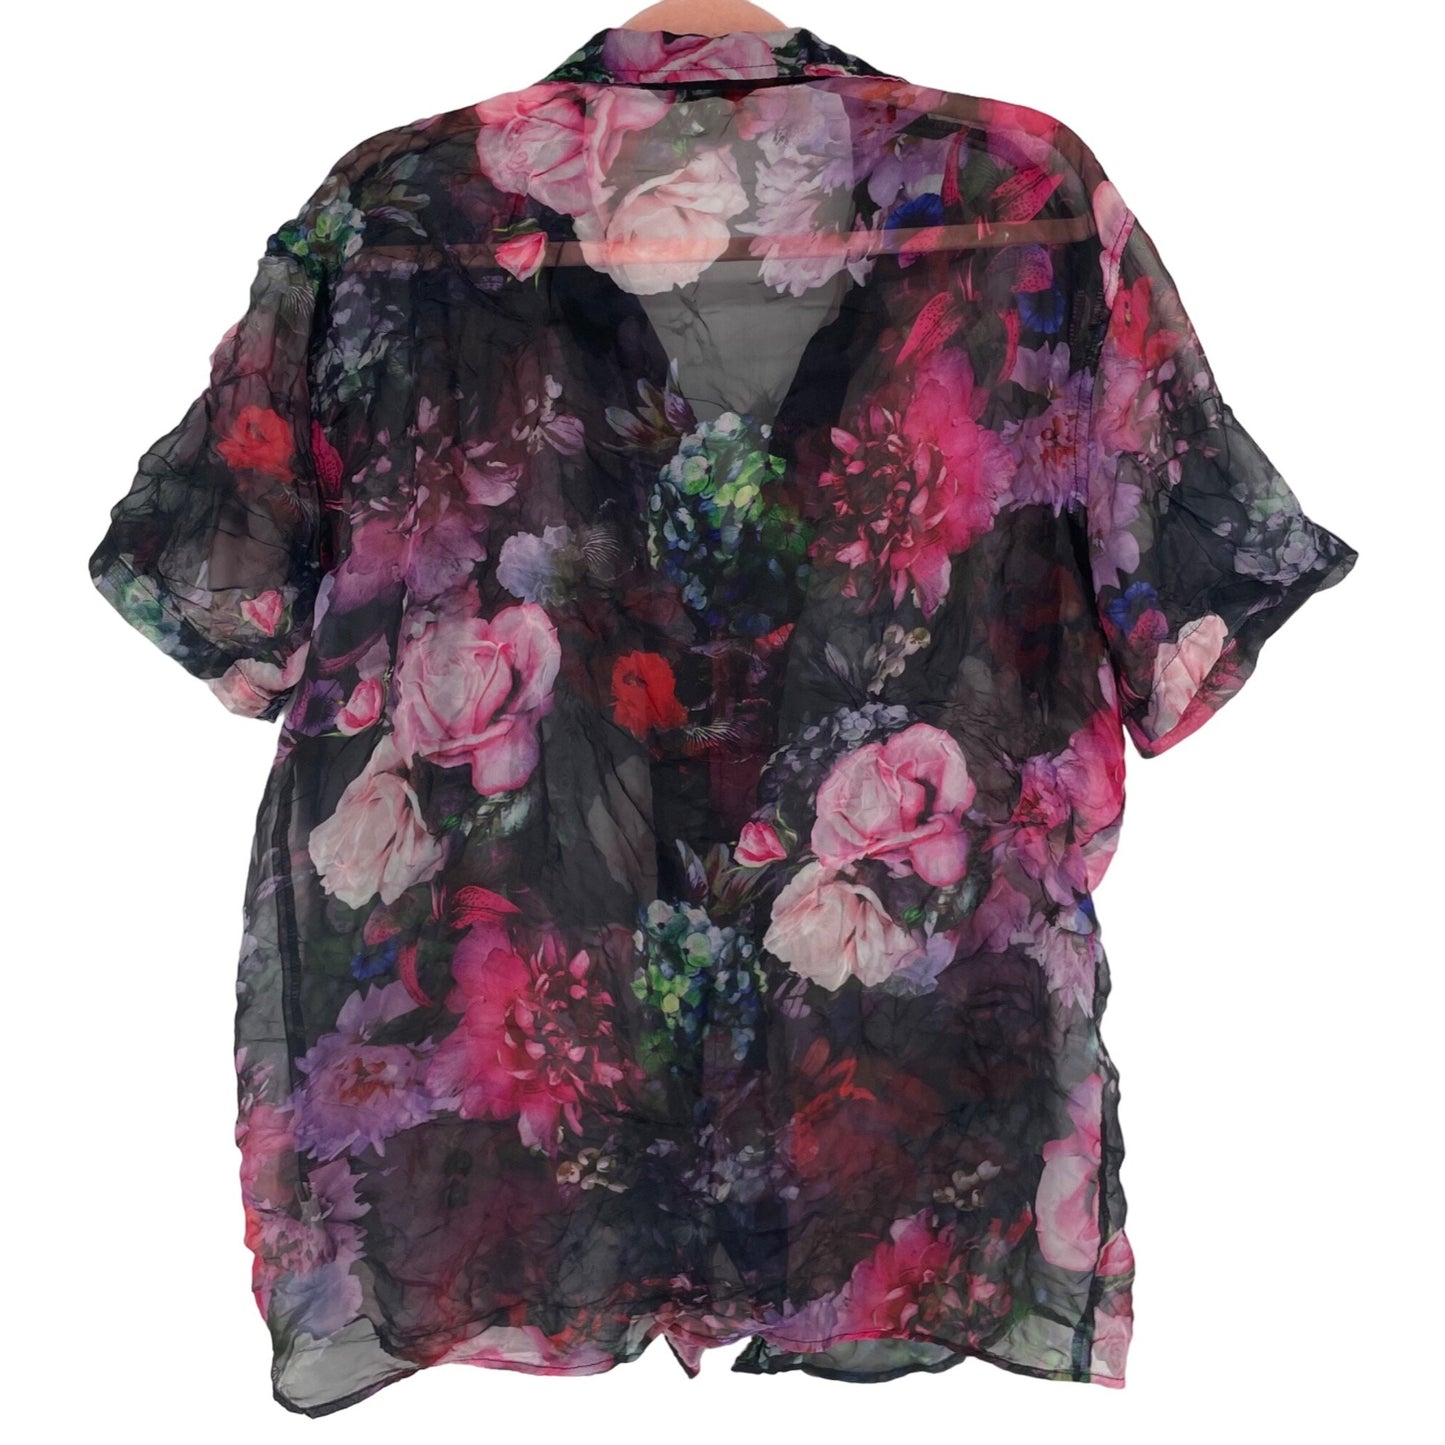 Shein Women's Size XL Short-Sleeved Sheer Button-Down Crinkly Floral Multi-Colored Top